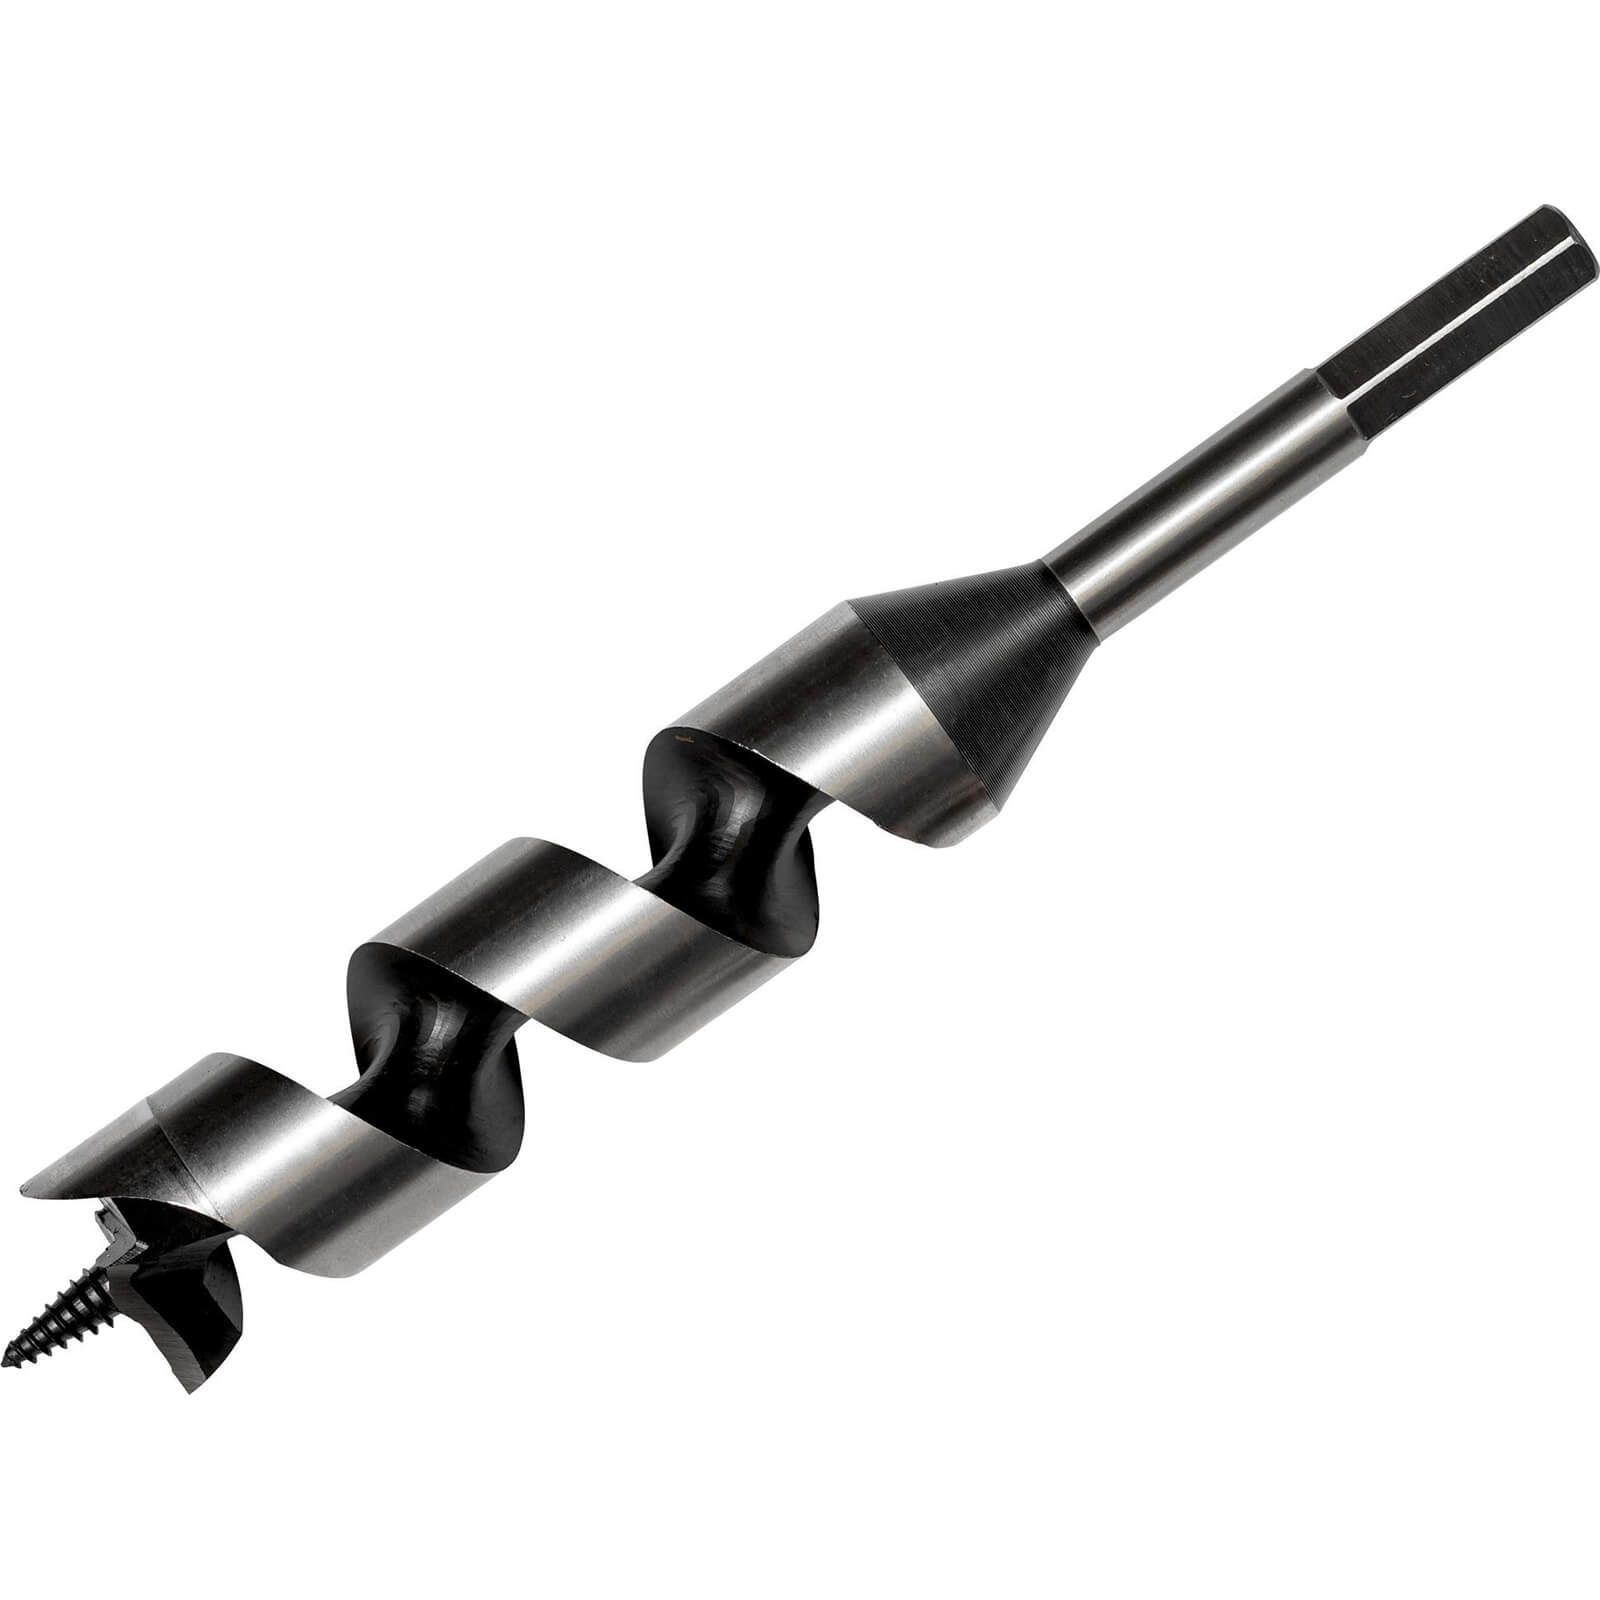 Image of Bahco 9626 Series Combination Auger Drill Bit 13mm 230mm